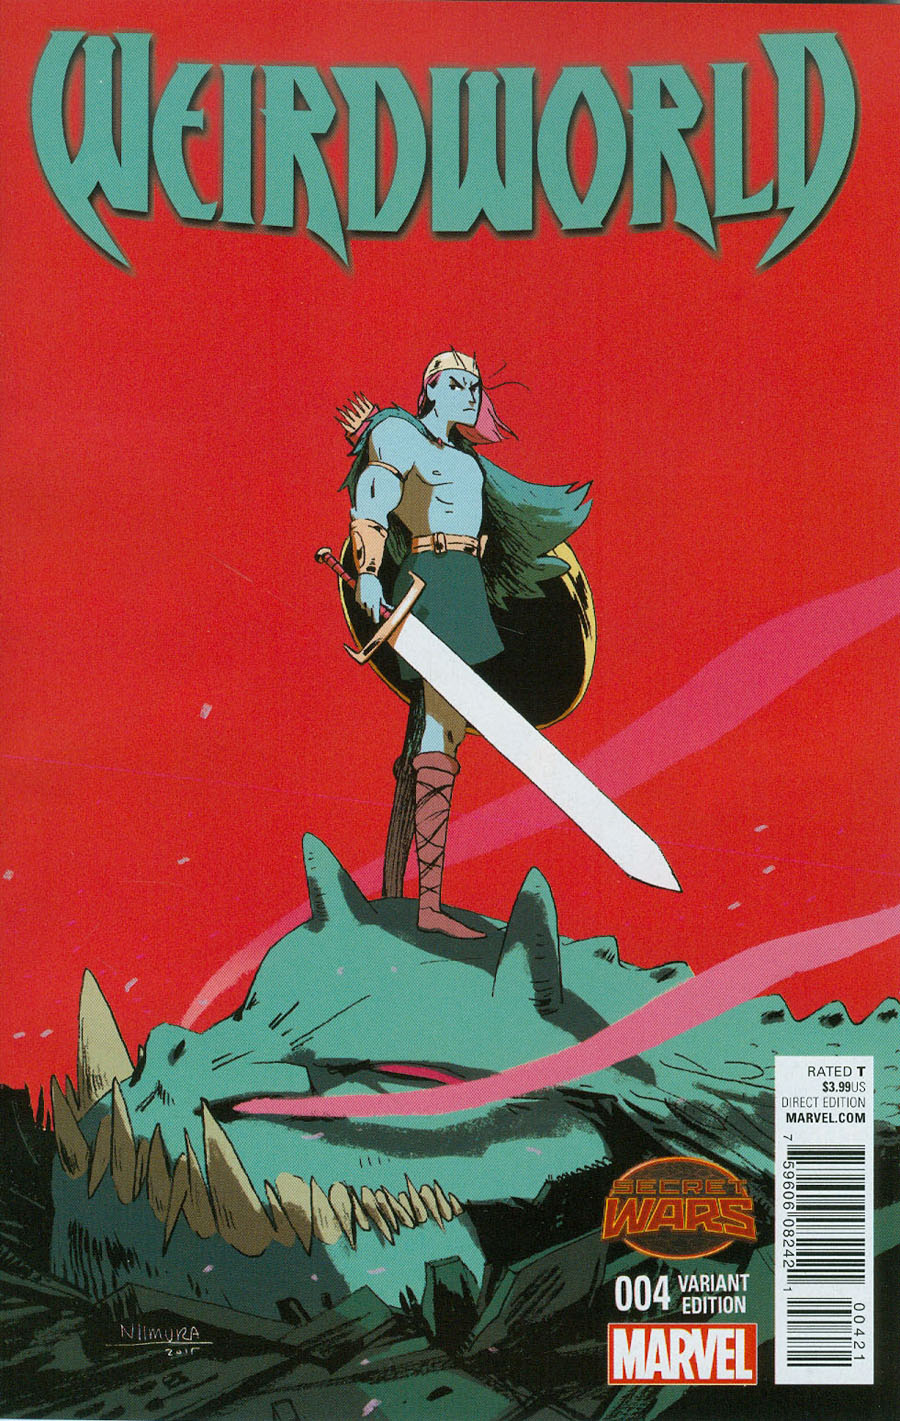 Weirdworld #4 Cover B Variant Manga Cover (Secret Wars Warzones Tie-In)